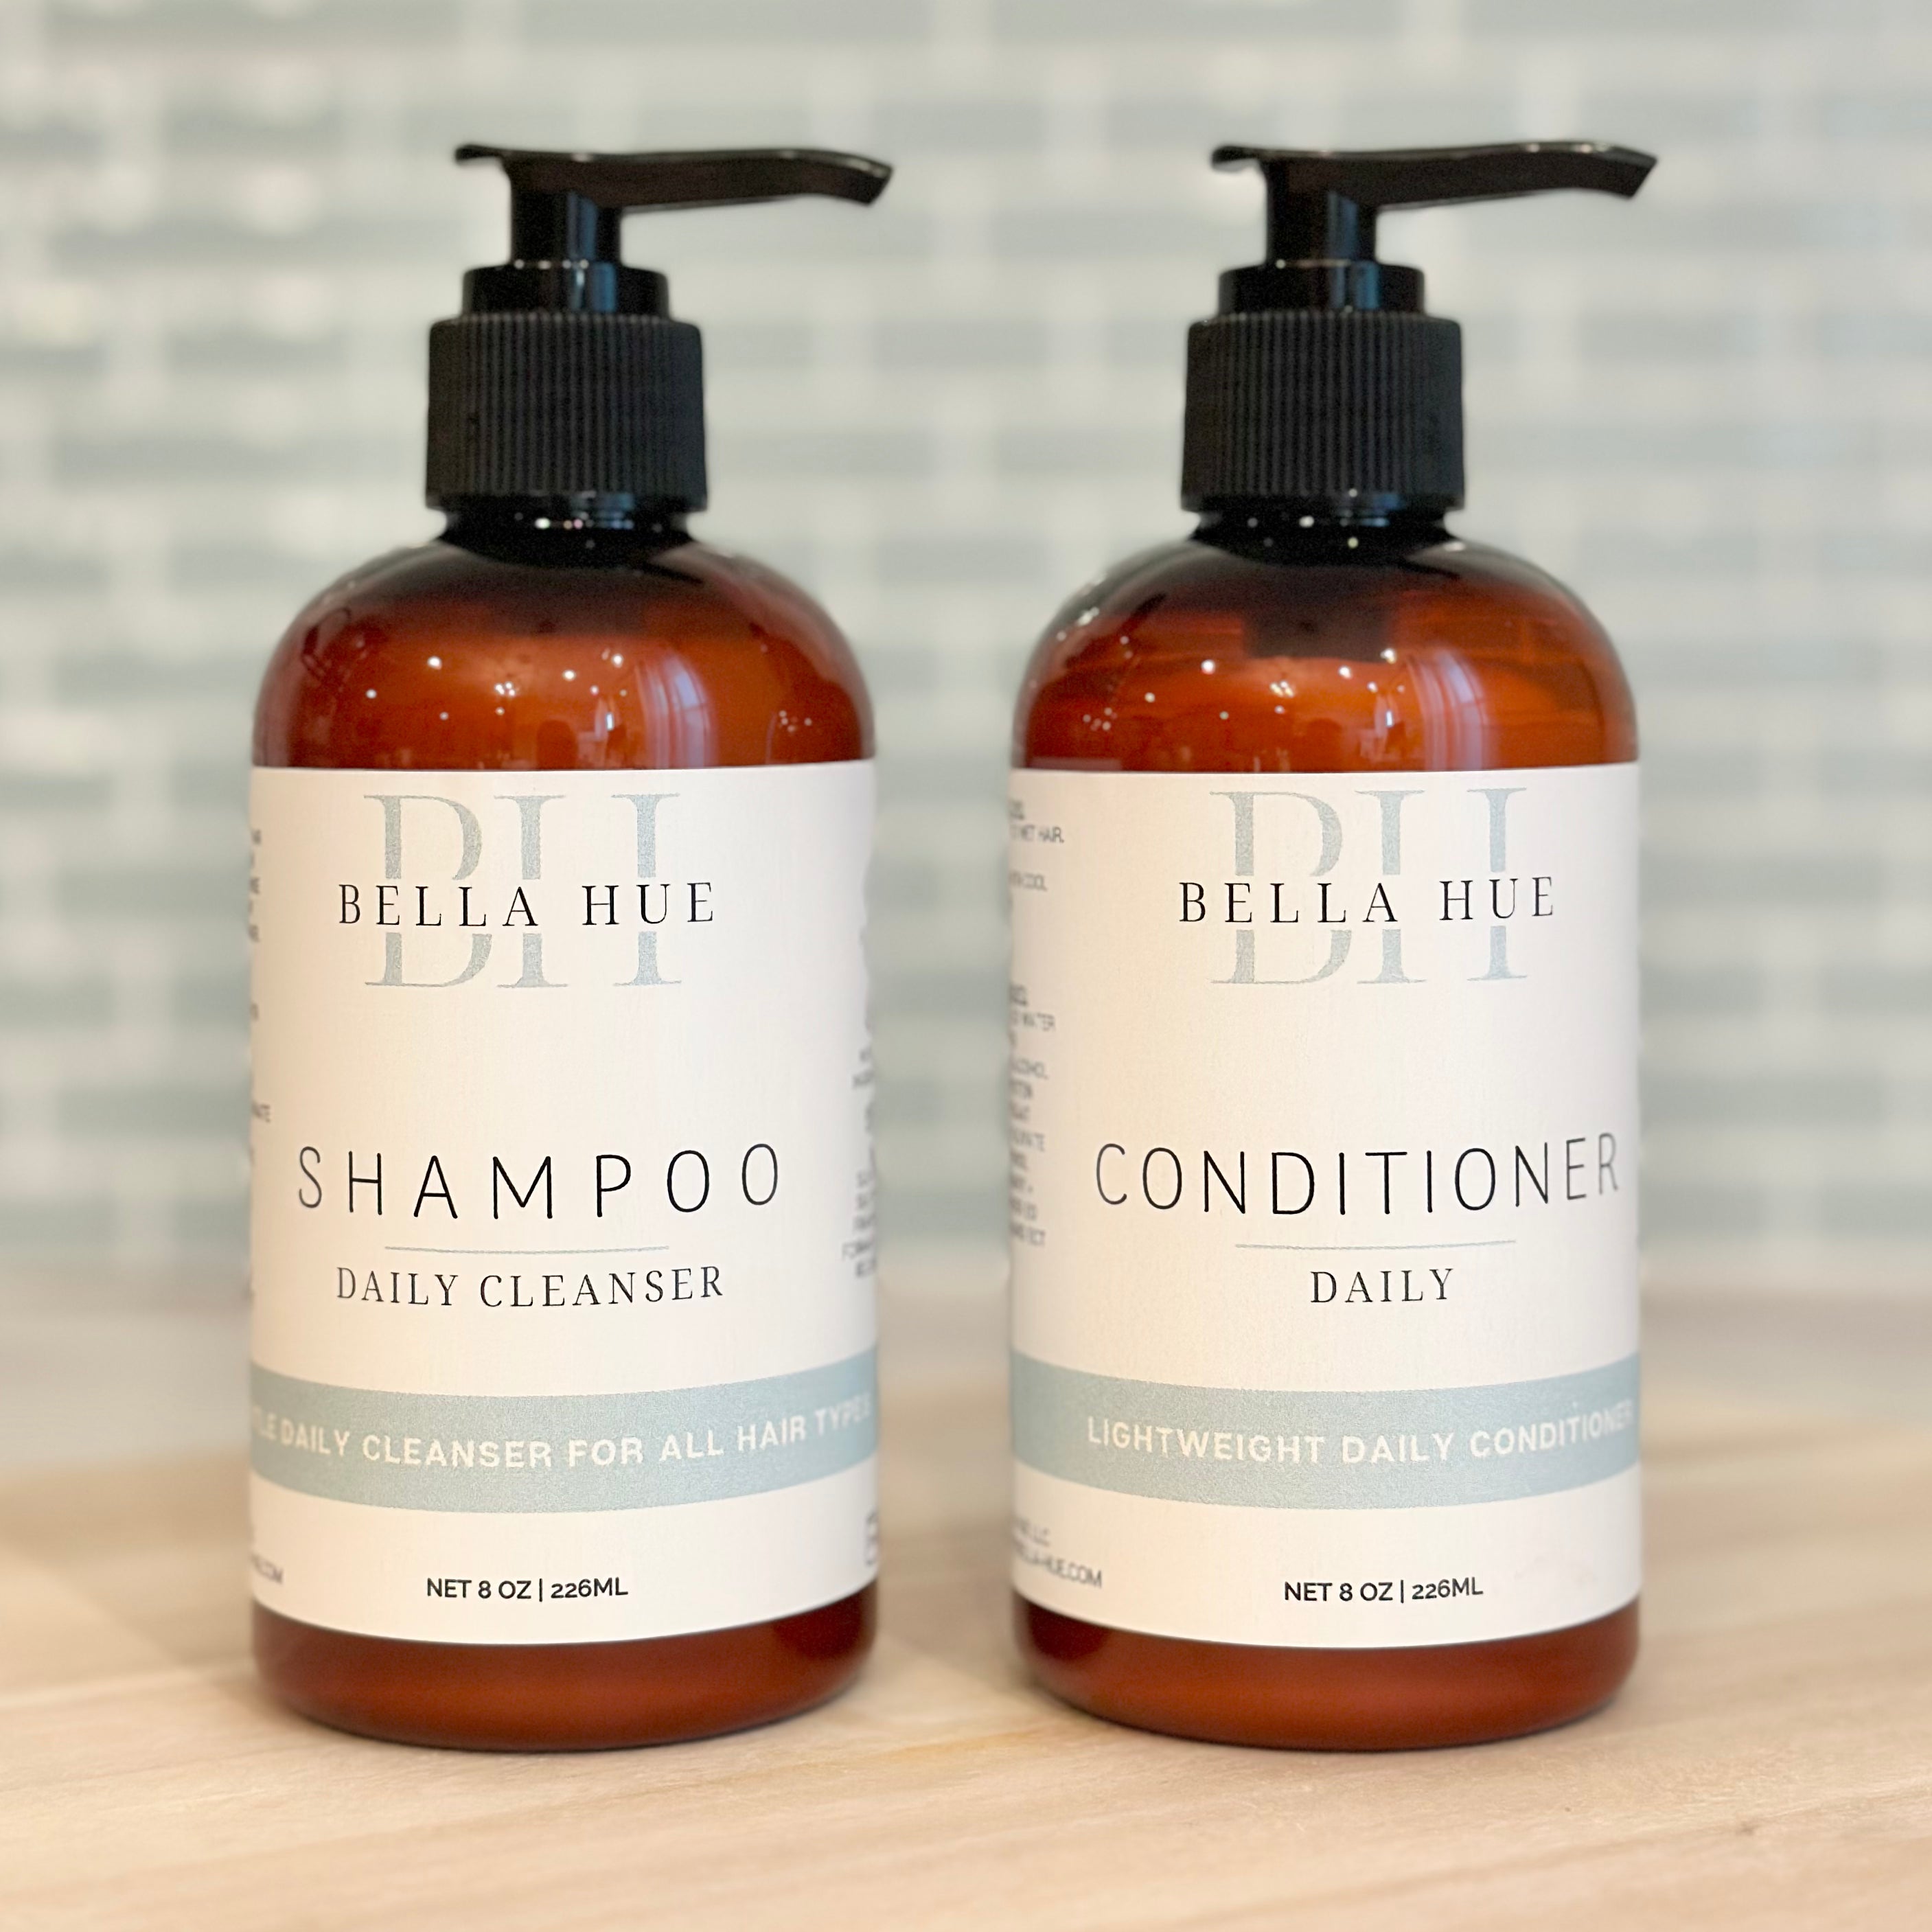 NEW- Daily Cleanser Shampoo (For All Hair Types)